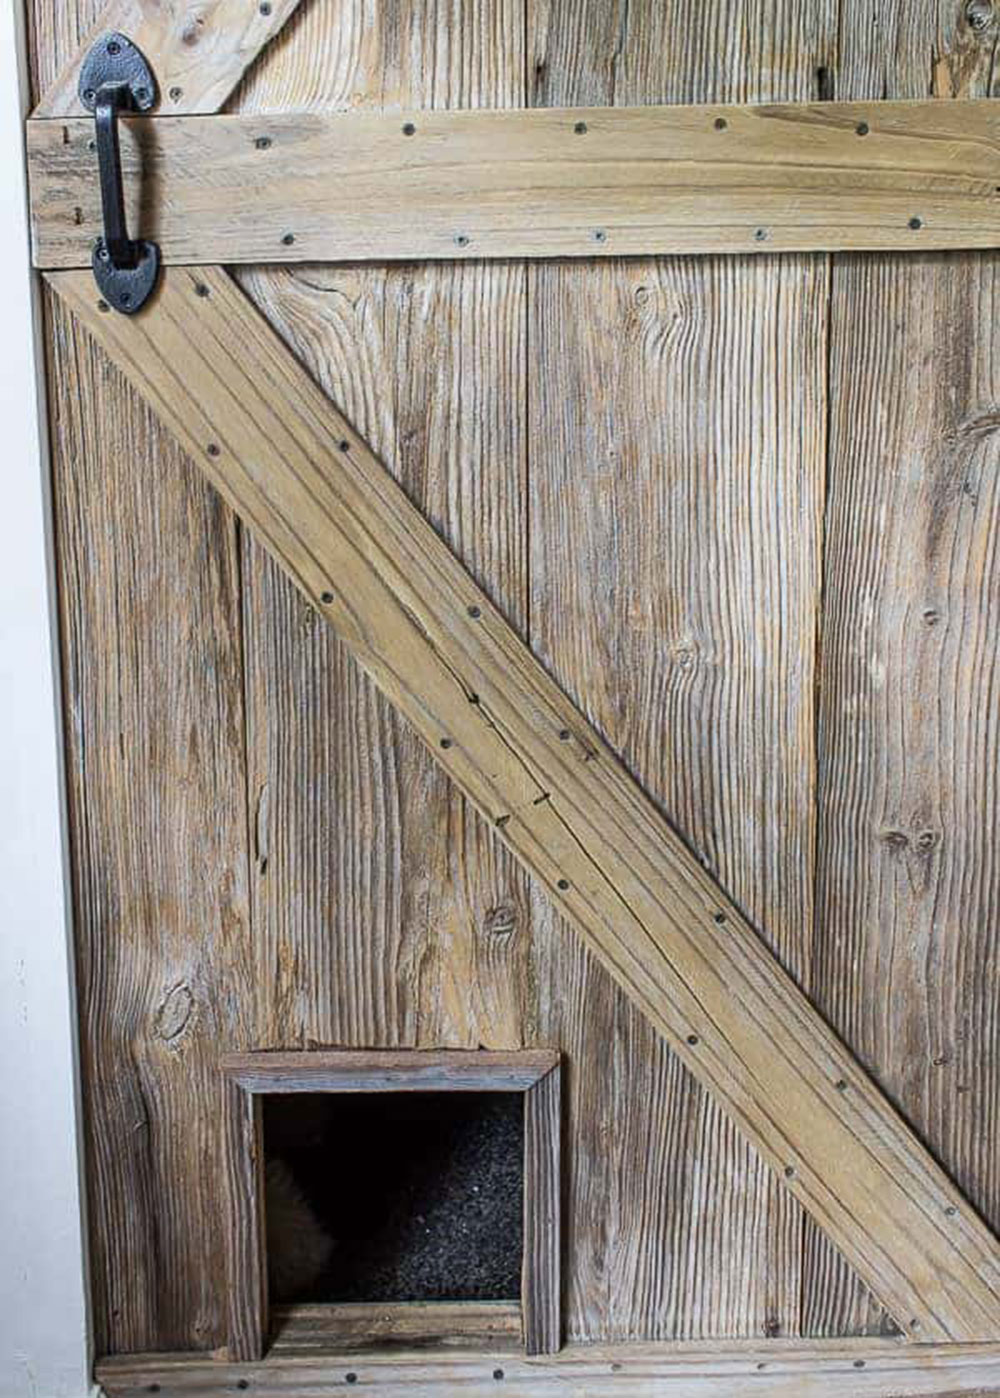 barn DIY dog door examples you can build for your pup